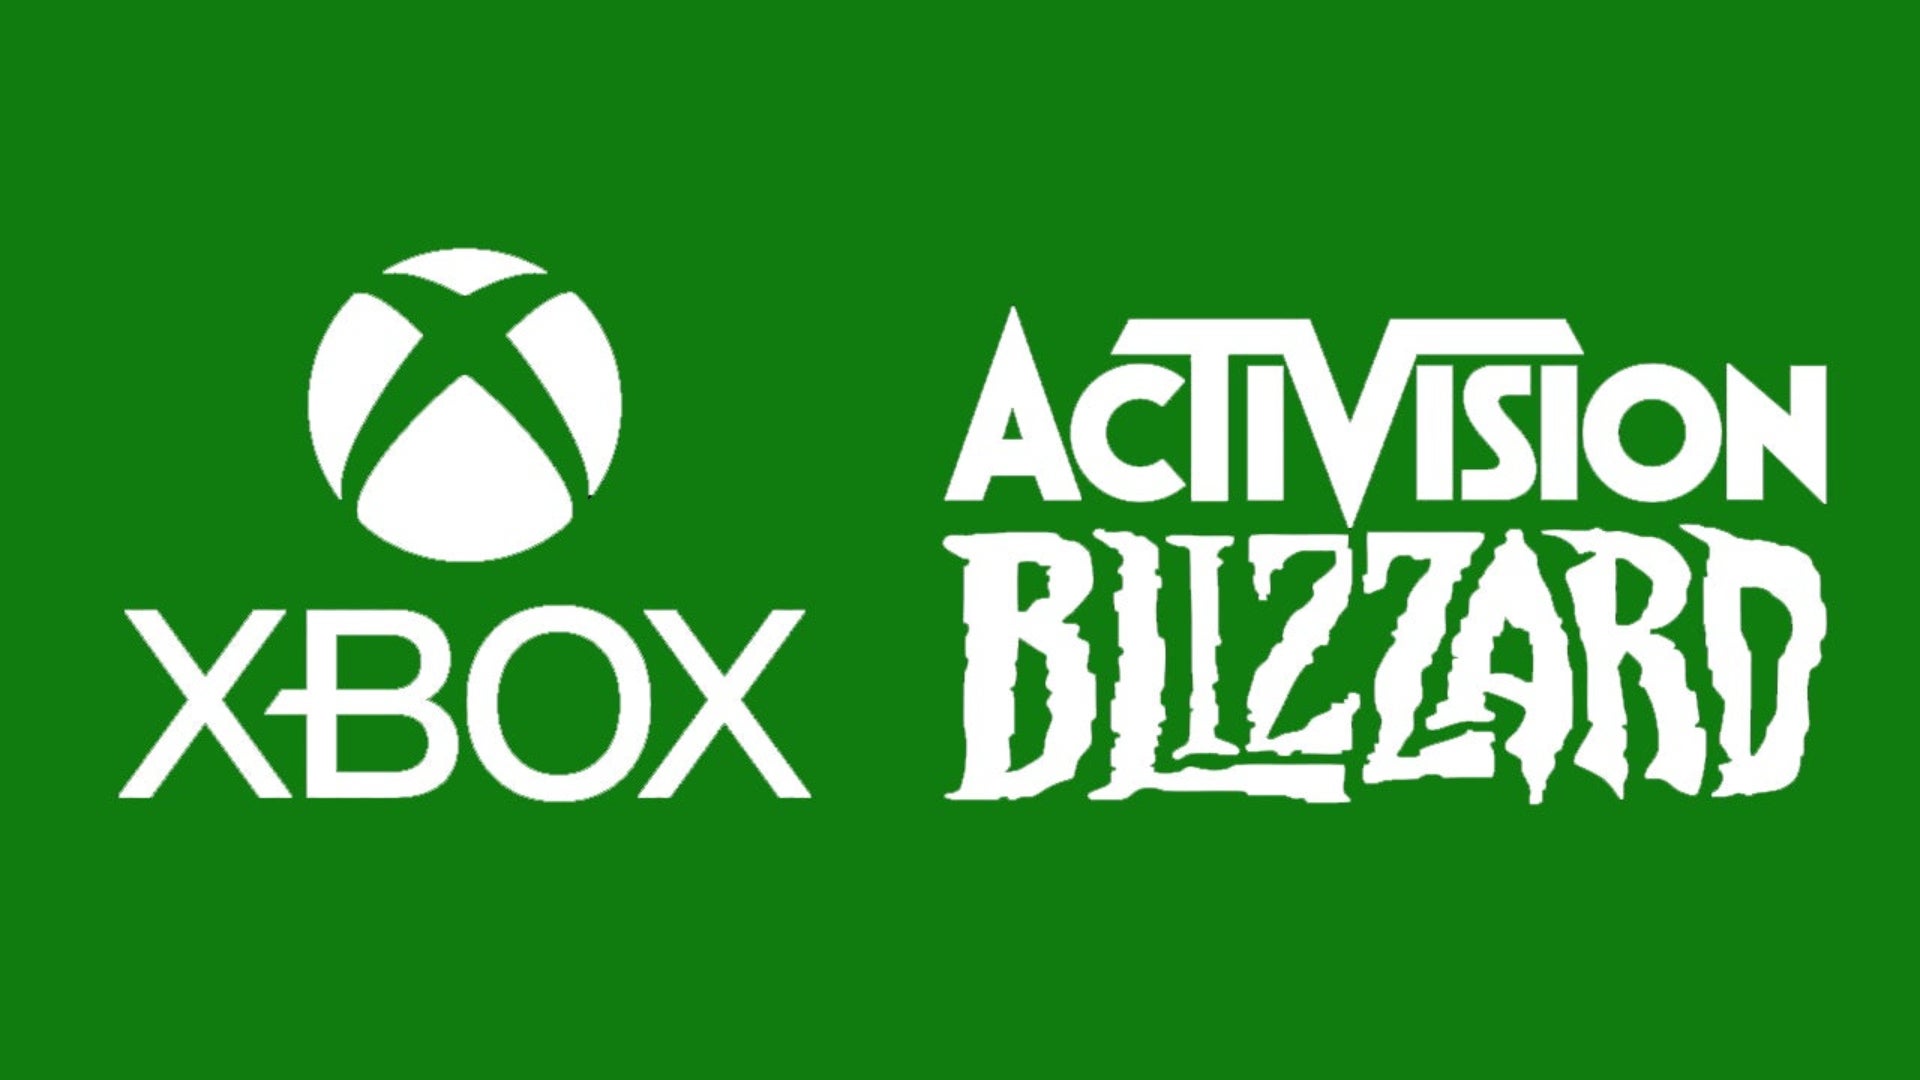 In the Latest Xbox-Activision Blizzard defense, the president of Microsoft likens Sony to Blockbuster